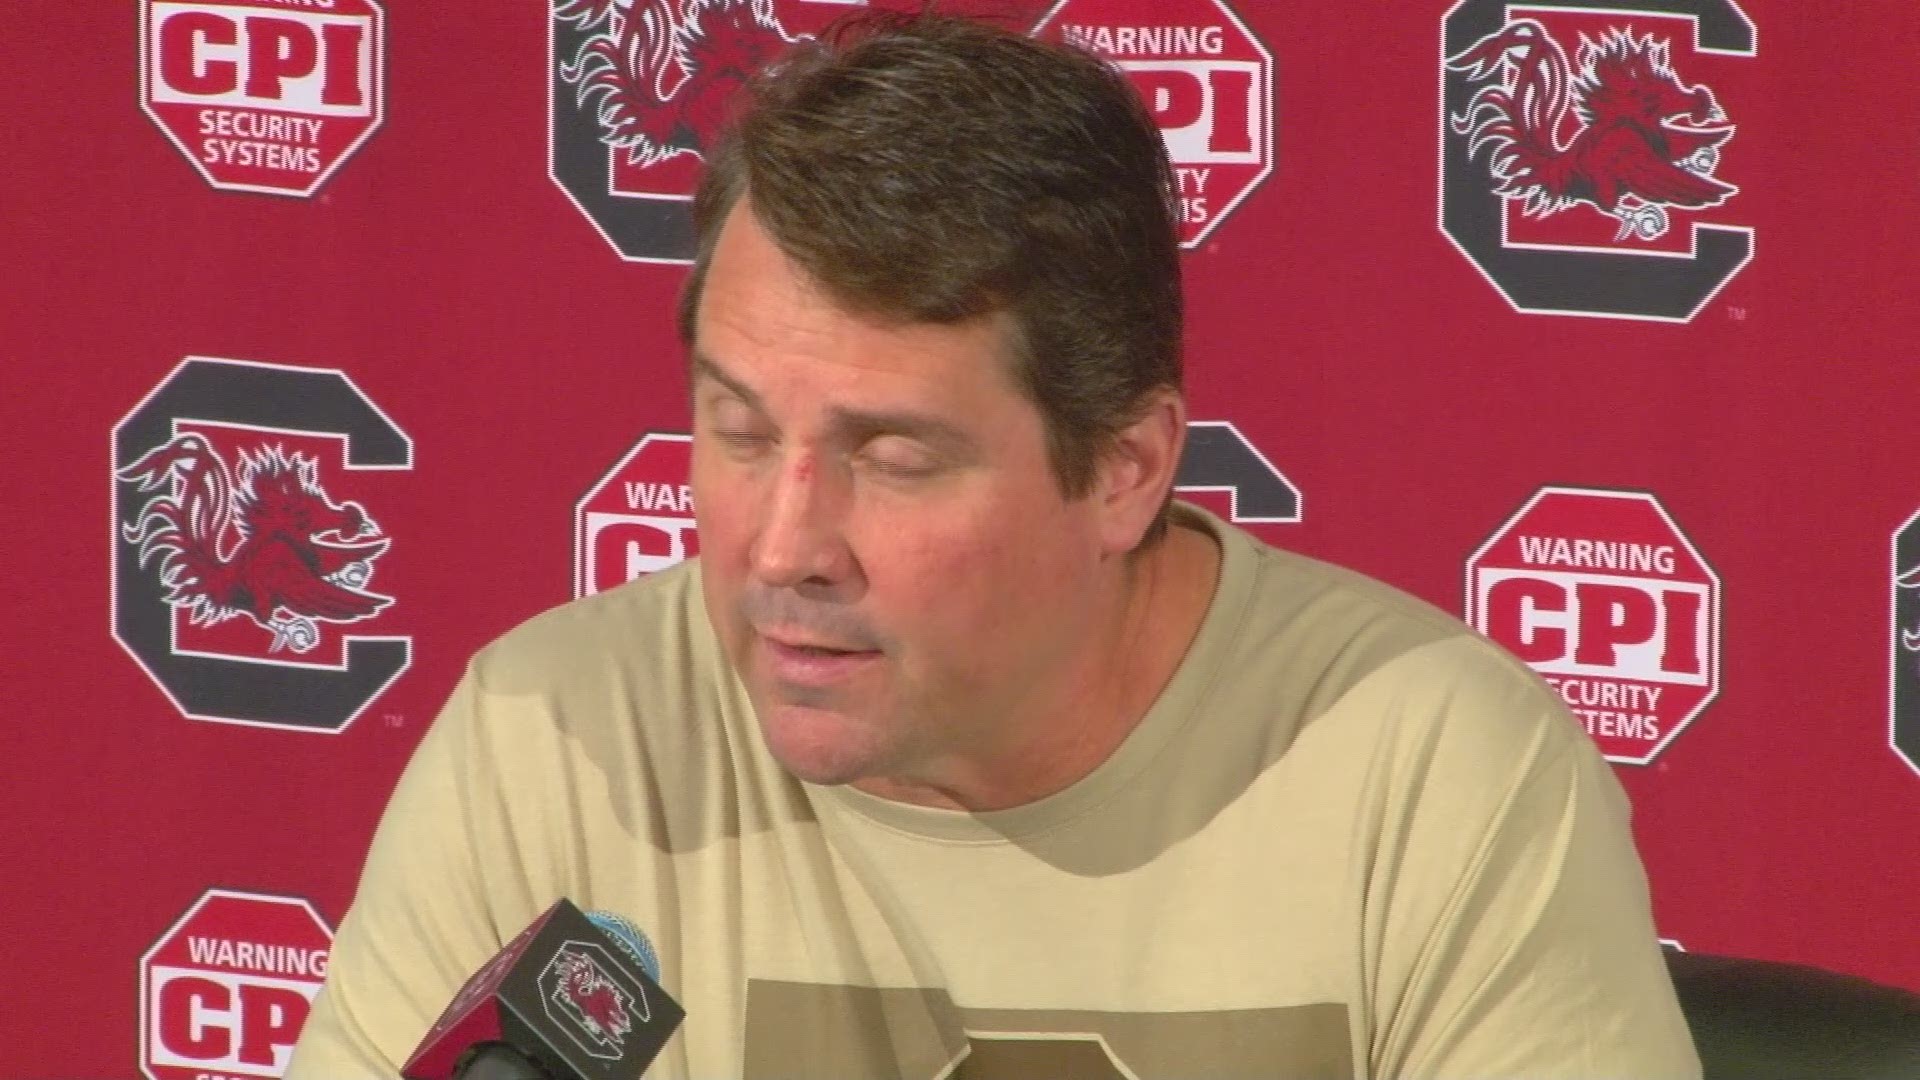 USC head coach Will Muschamp and the Gamecocks will recognize 20 seniors before kicking off against Chattanooga on Saturday night. Muschamp talks about how his team has to improve tackling and being supportive of his son who will be playing for a state ti